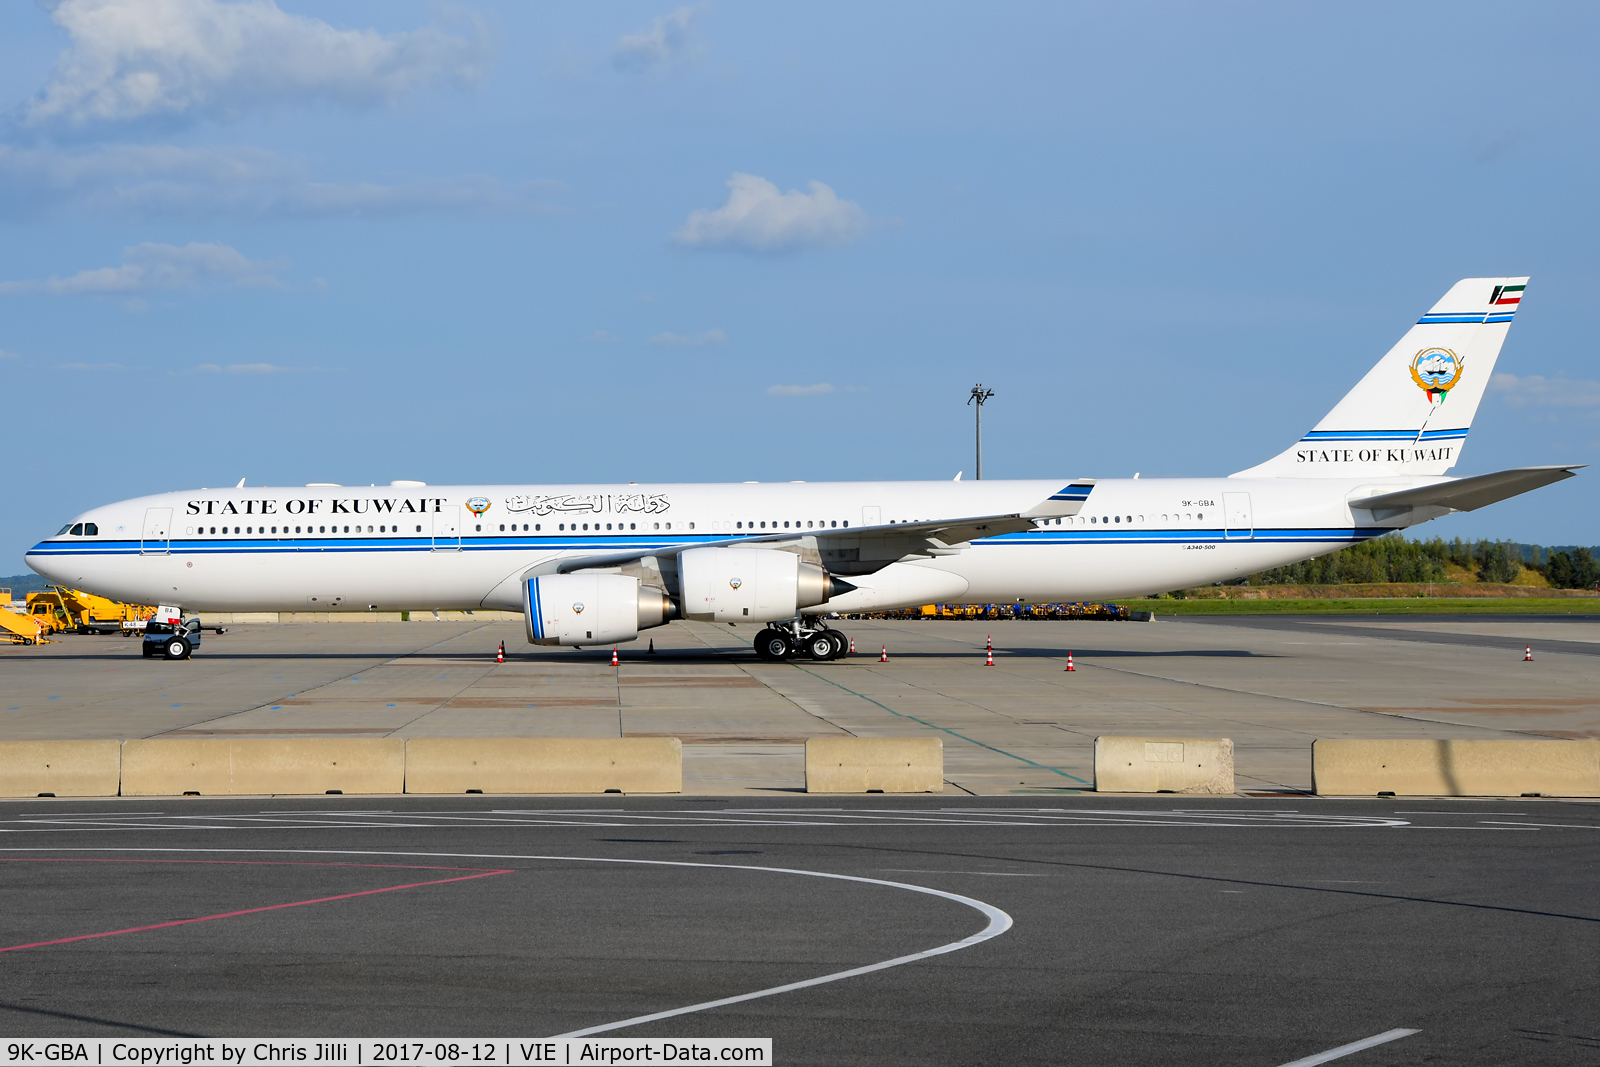 9K-GBA, 2009 Airbus A340-542 C/N 1091, State of Kuwait